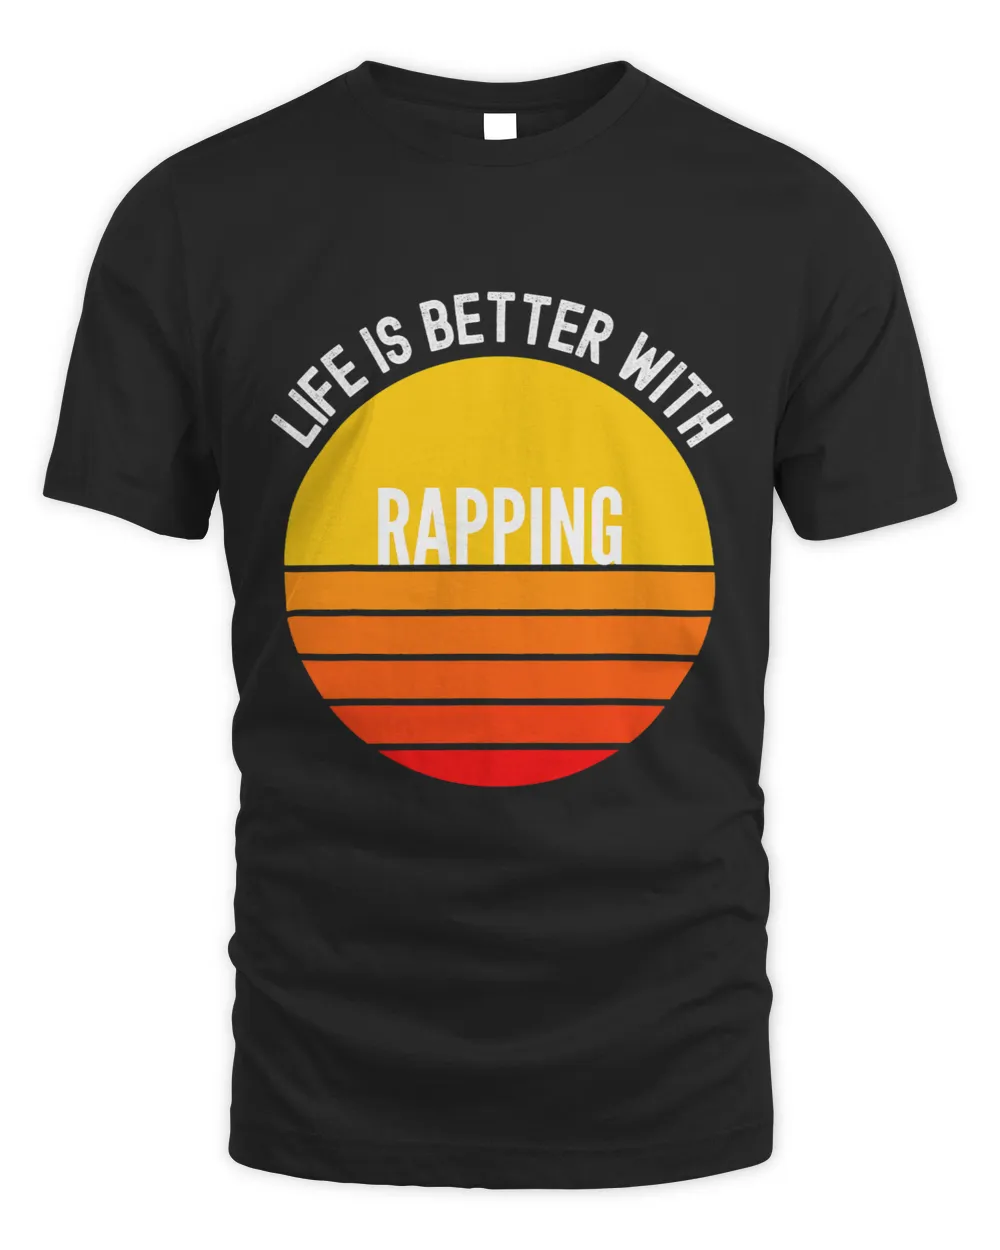 Rapping Shirt Life is Better With Rapping